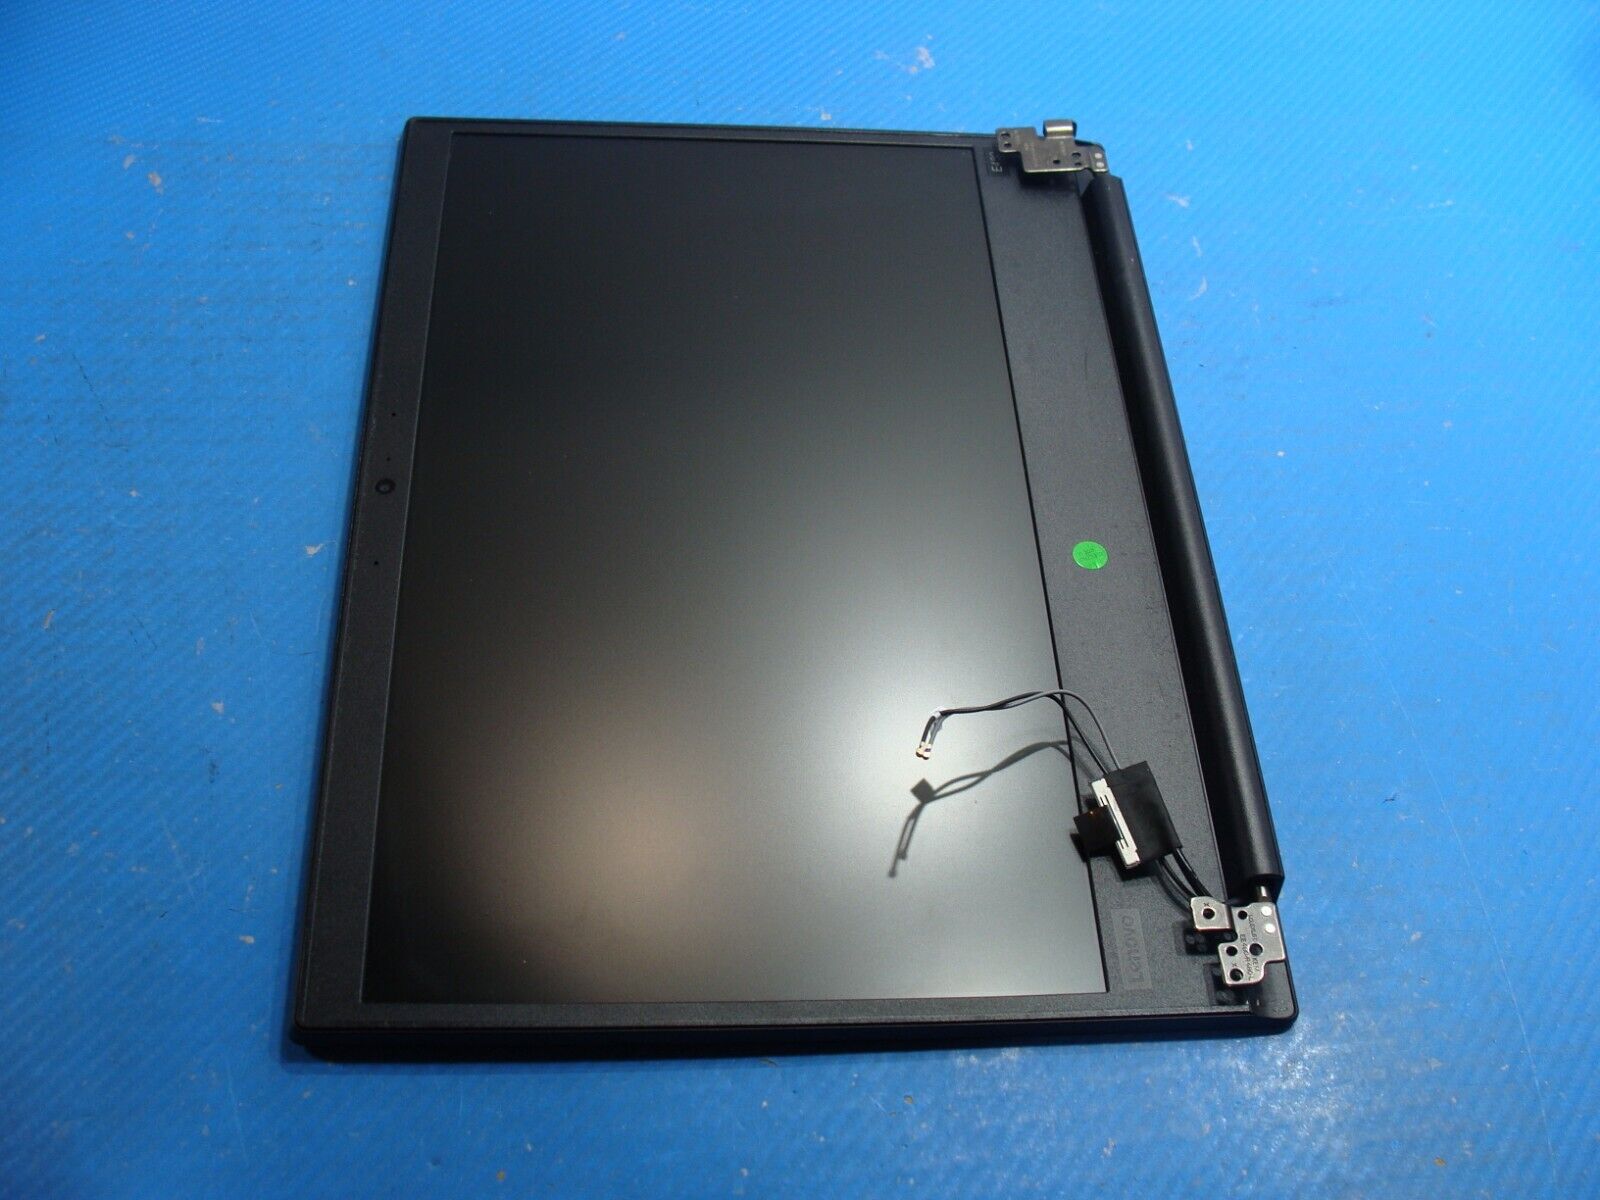 Lenovo Thinkpad E480 14 Genuine Laptop HD LCD Screen Complete Assembly